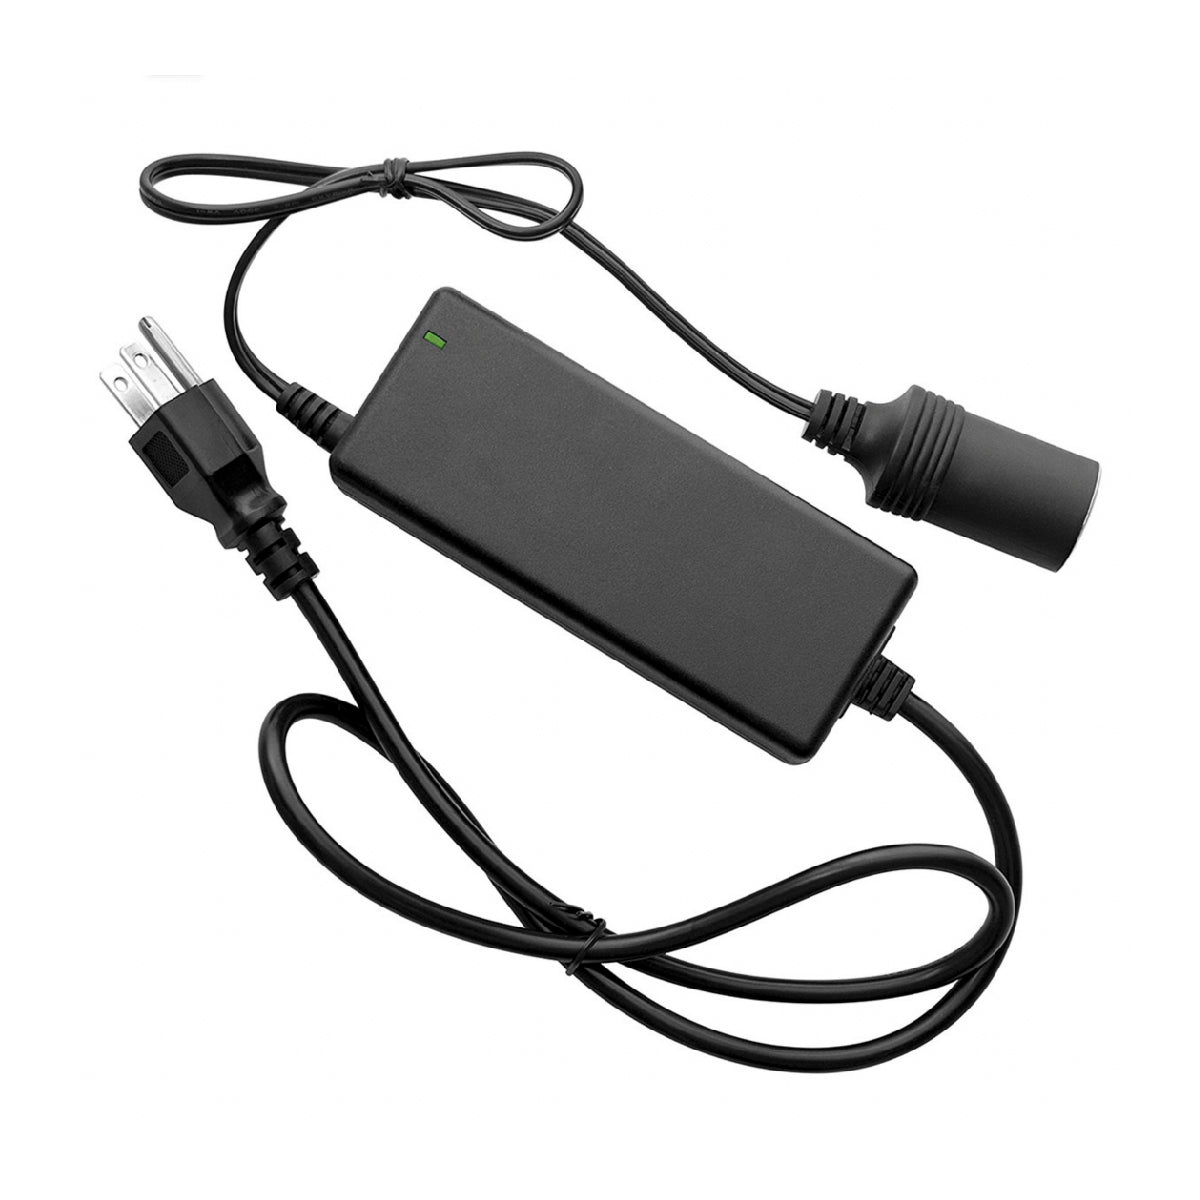 PowerPak 1500 Replacement Charger